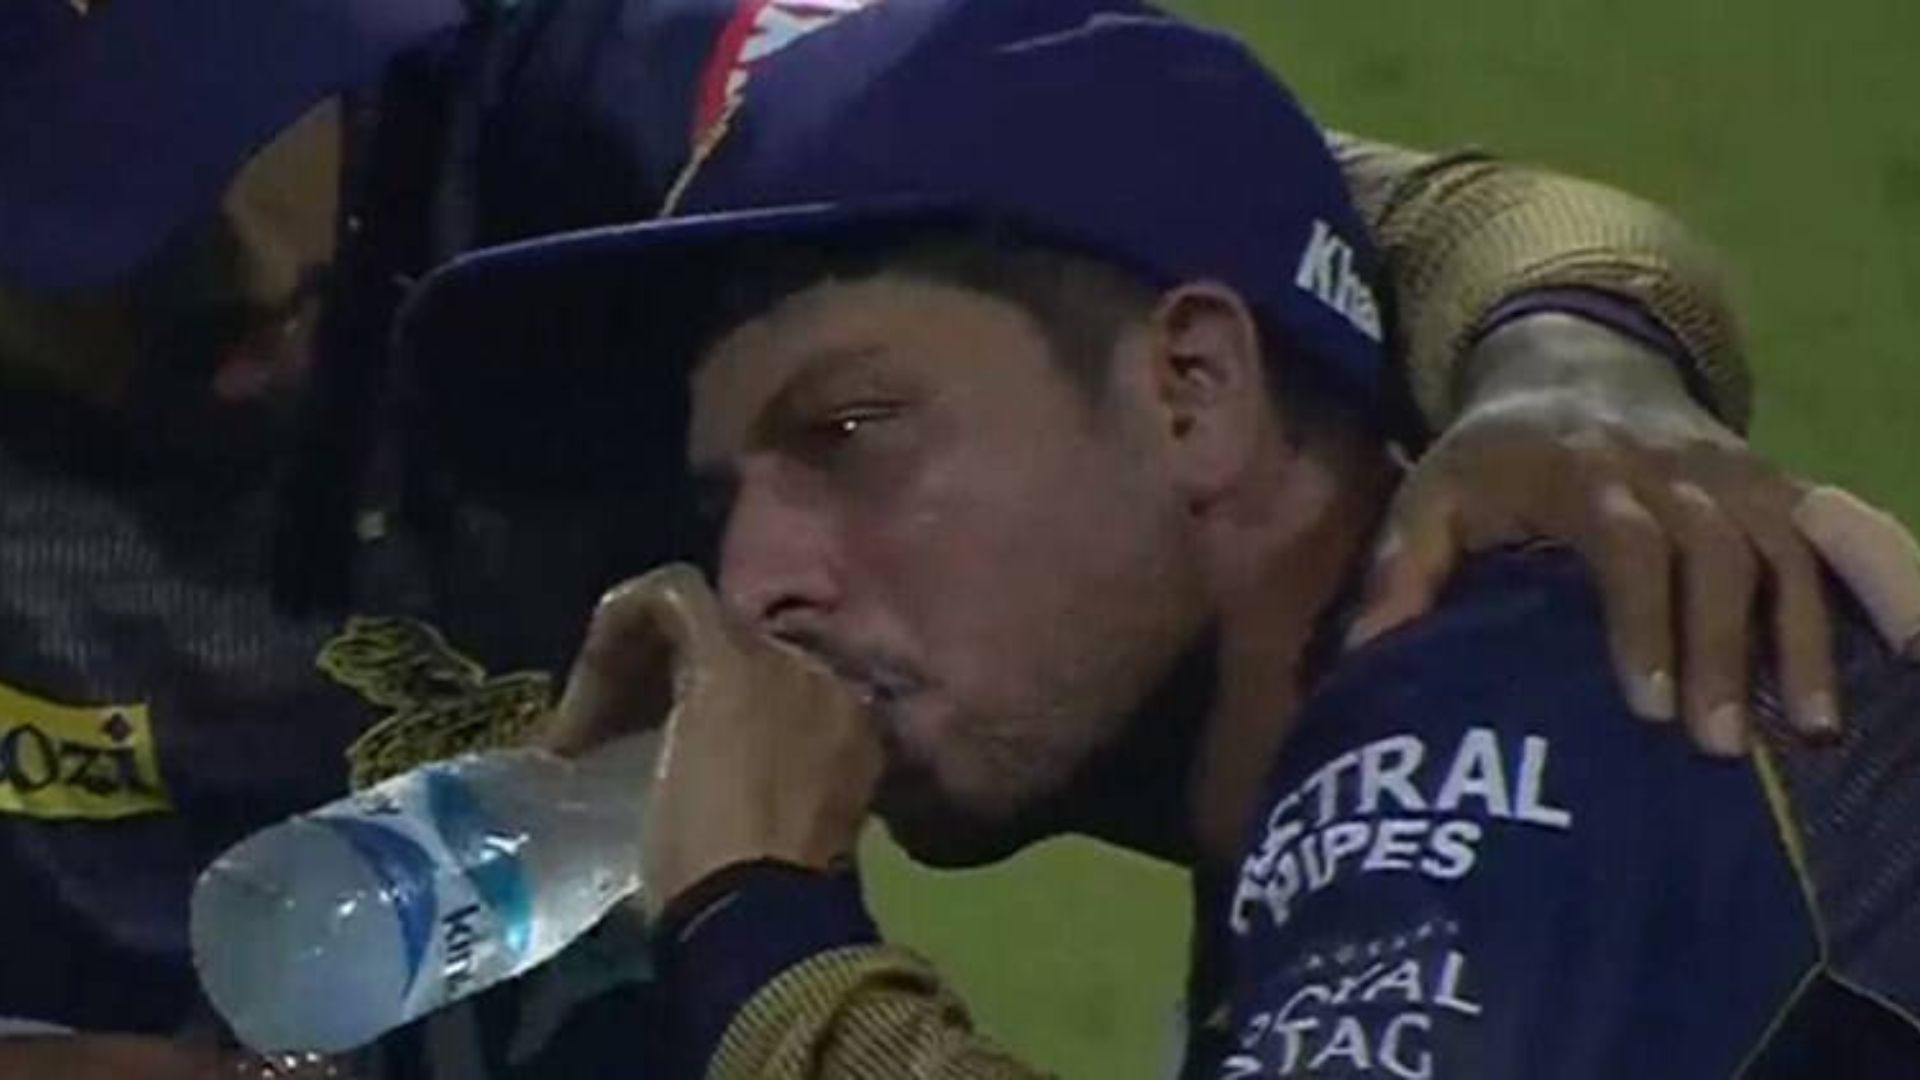 Kuldeep yadav seemed shattered after that over to Moeen Ali (P.C.:Twitter)